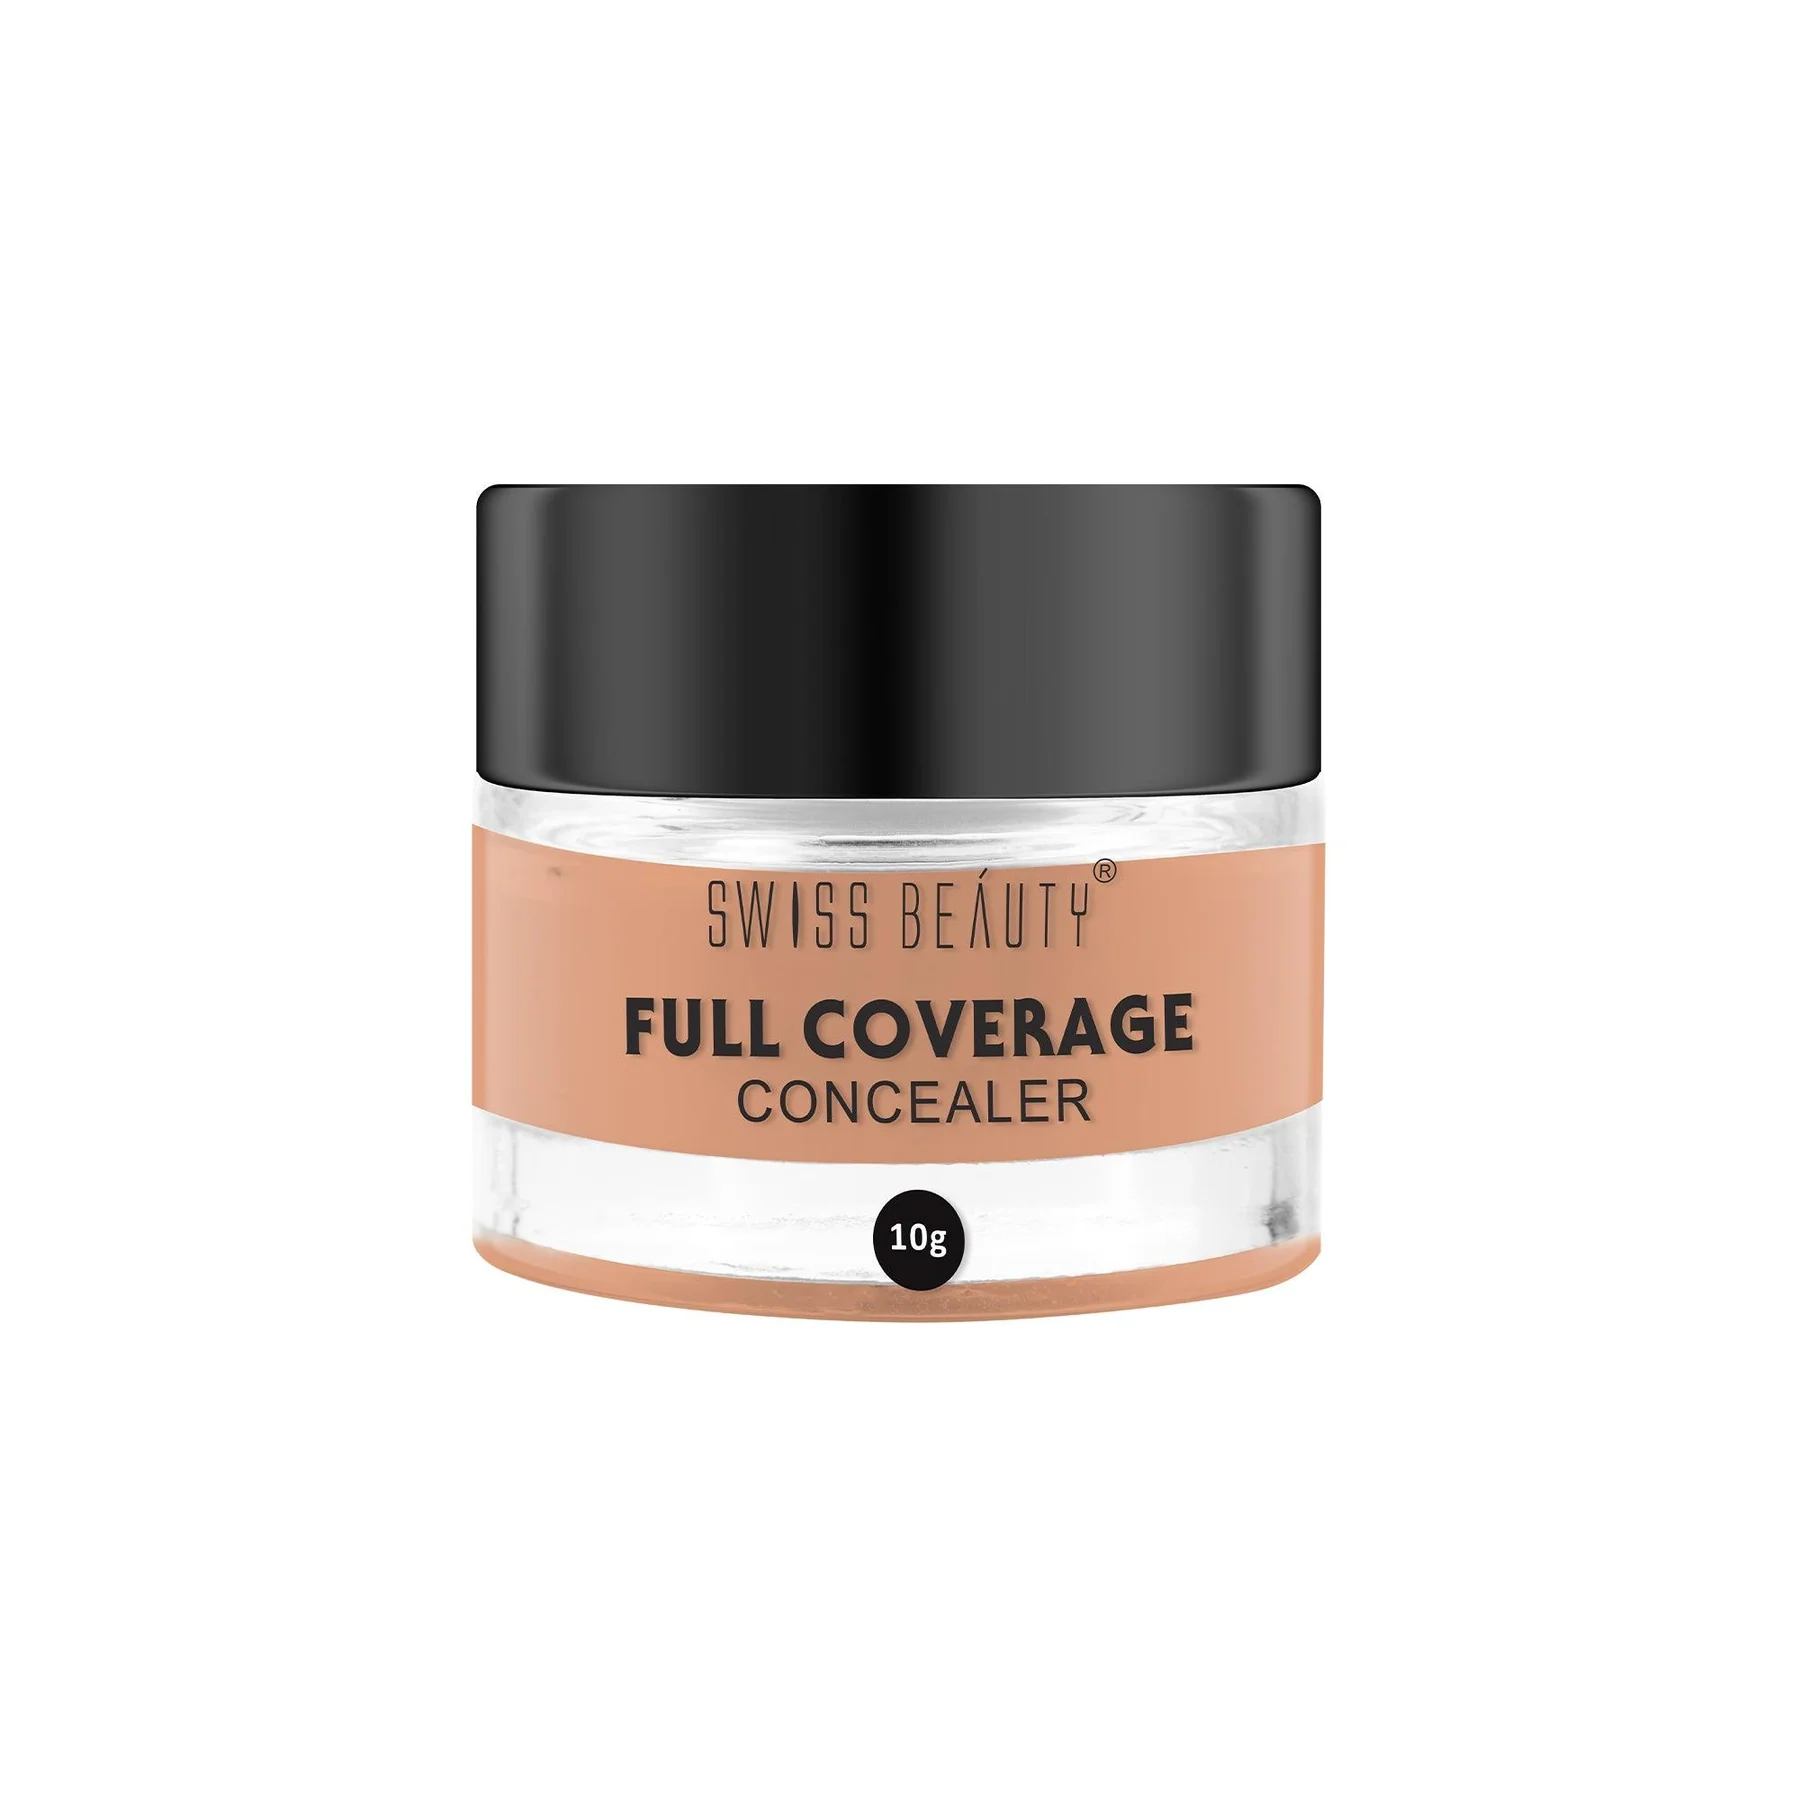 Swiss beauty full coverage concealer